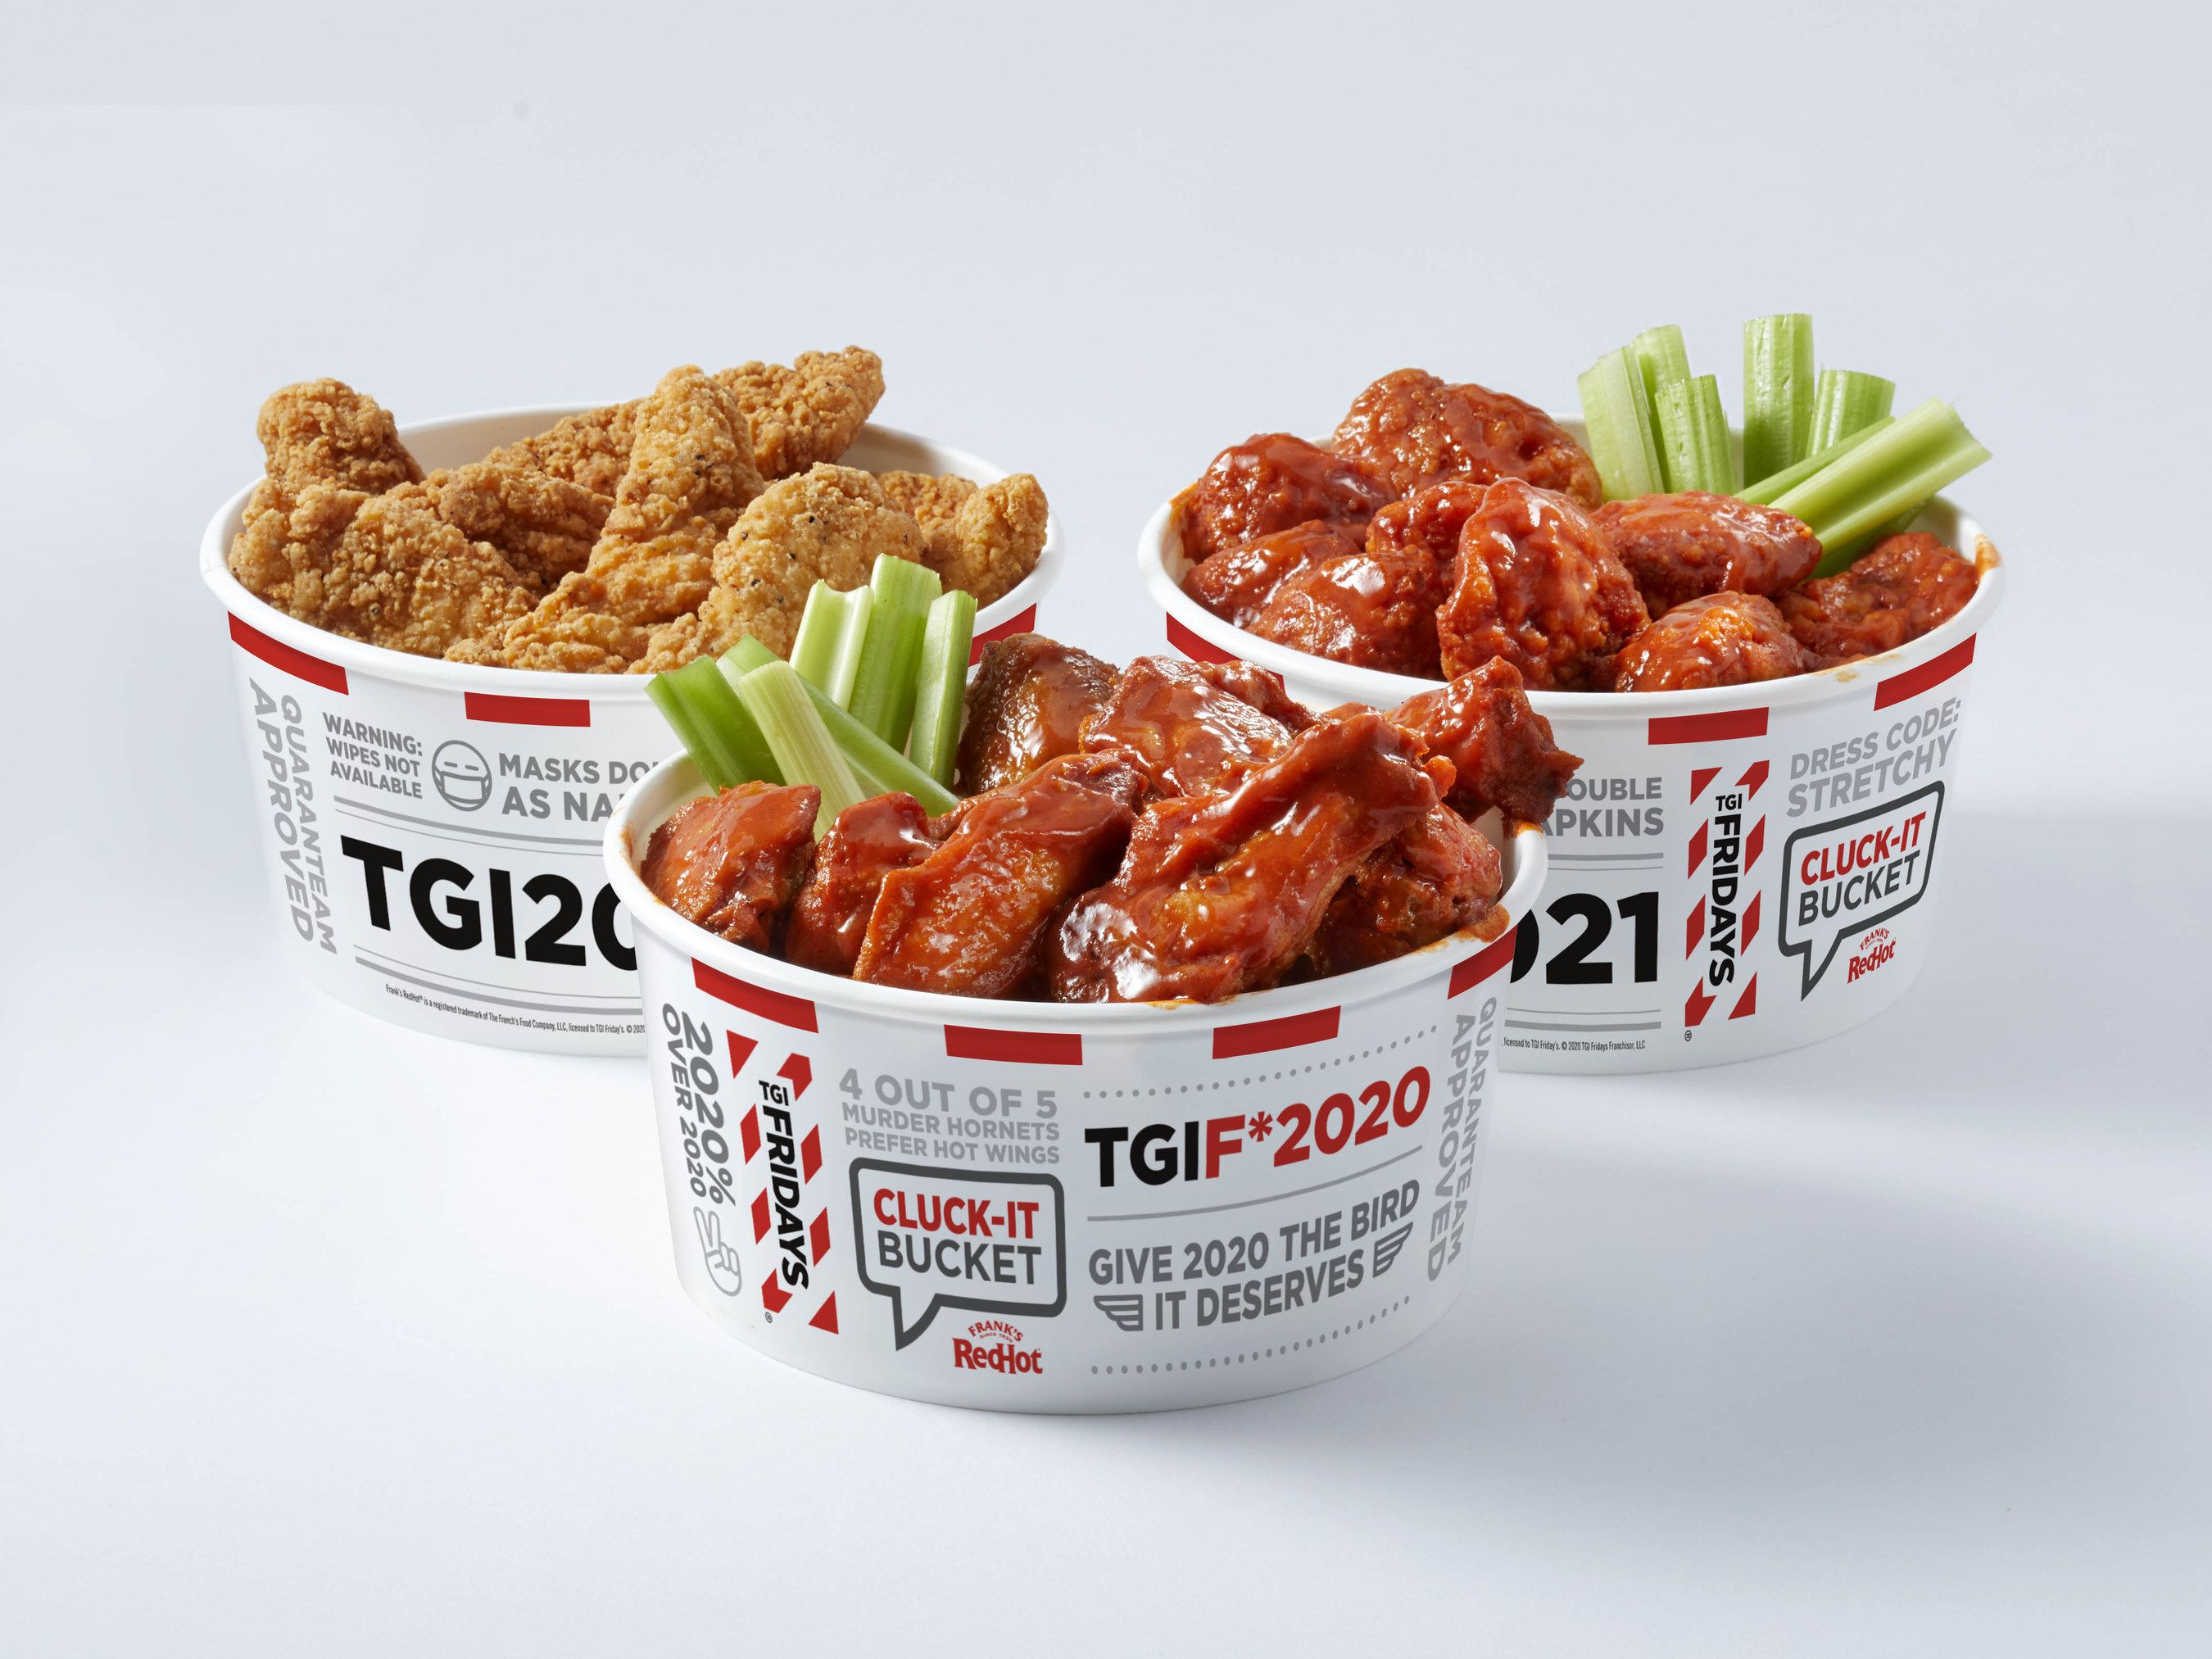 TGI Friday's Is Selling Buckets Full Of Chicken Wings And Tenders